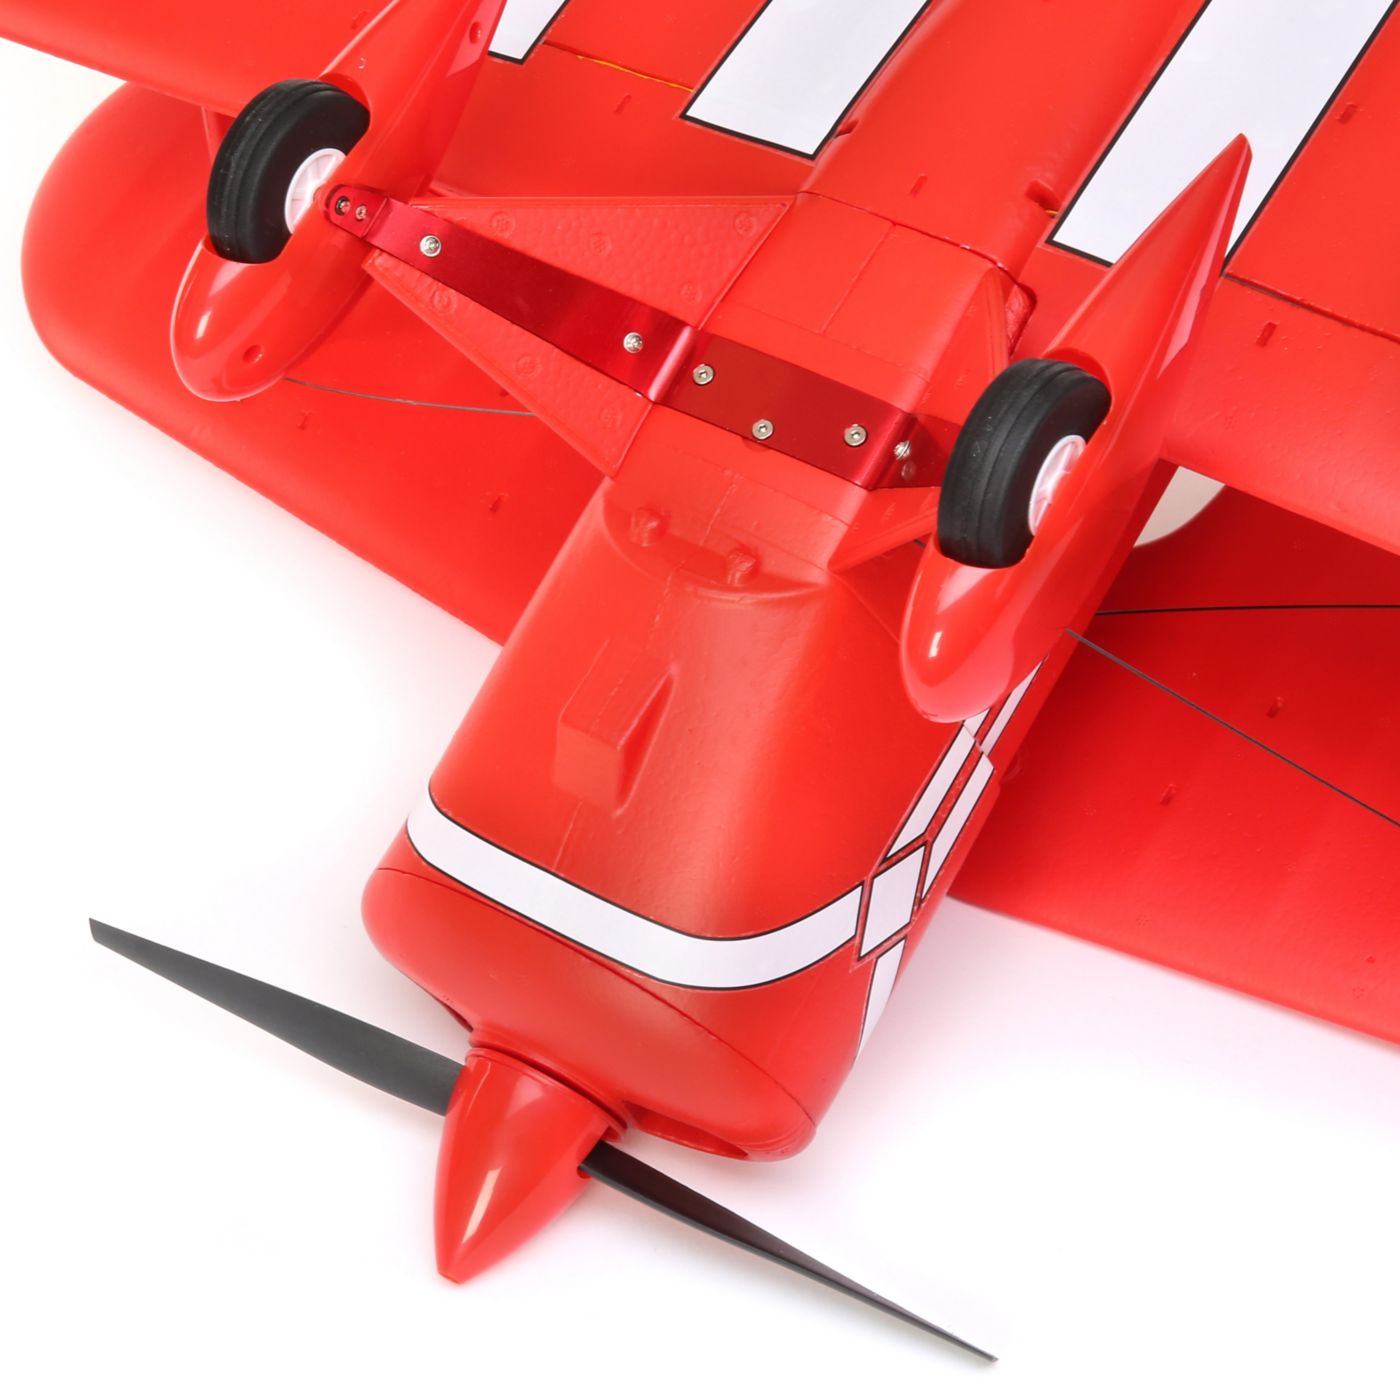 E-flite Pitts S-1S BNF Basic Safe As3x 03